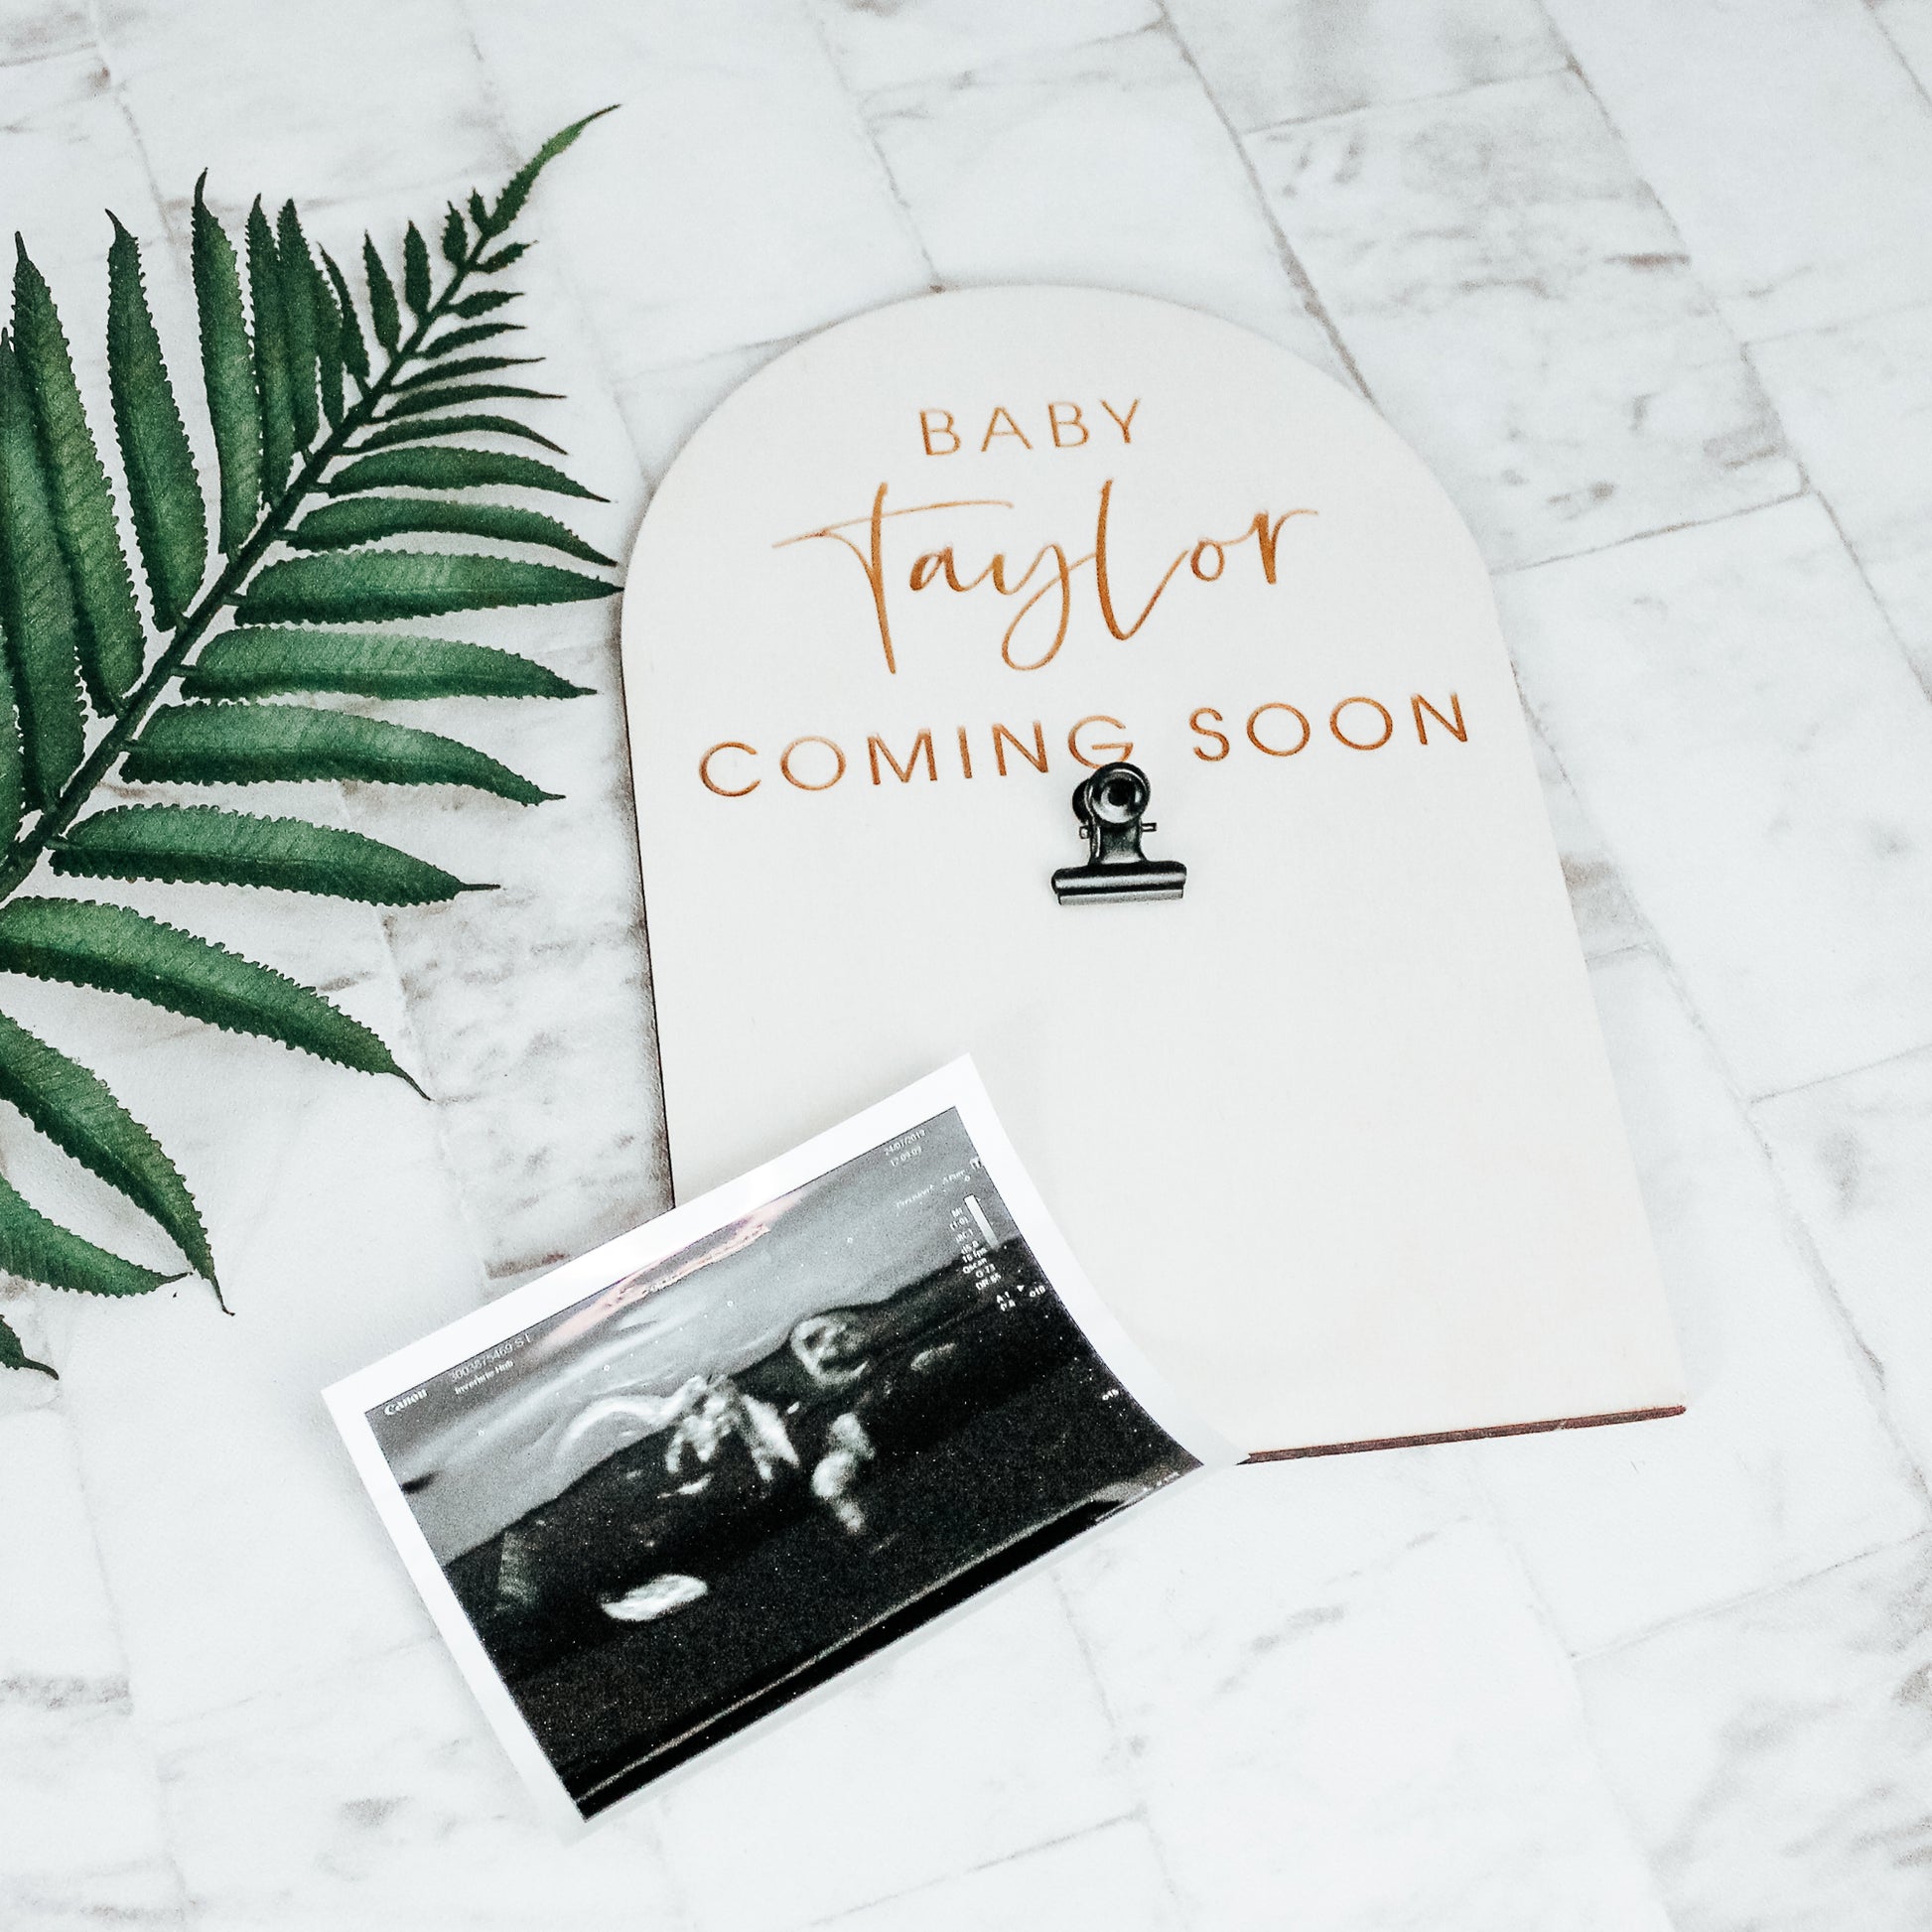 engraved and personalised wooden baby announcement sign - minimalist photo prop - perfect for showing your new addition on social media